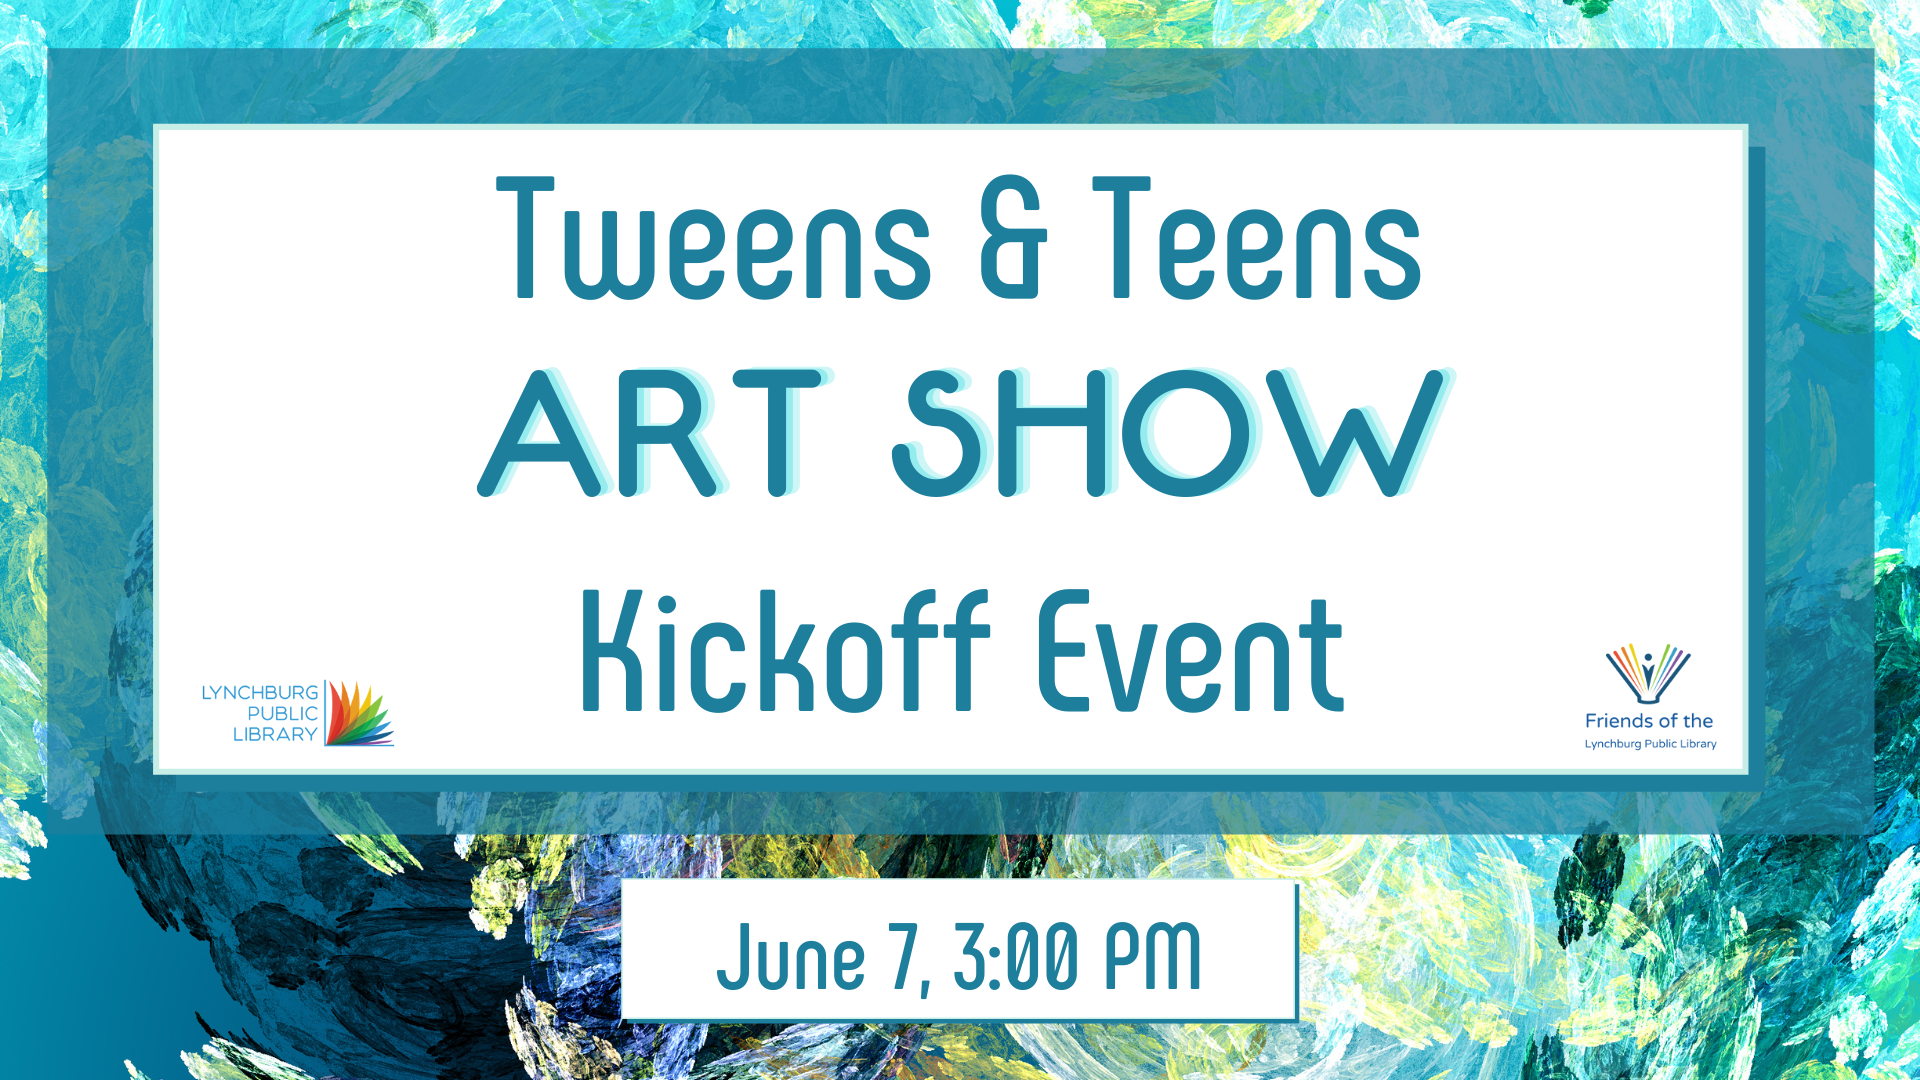 Image features paint splattered background. Text states Tweens & Teens Art Show Kickoff Event June 7 3:00 PM